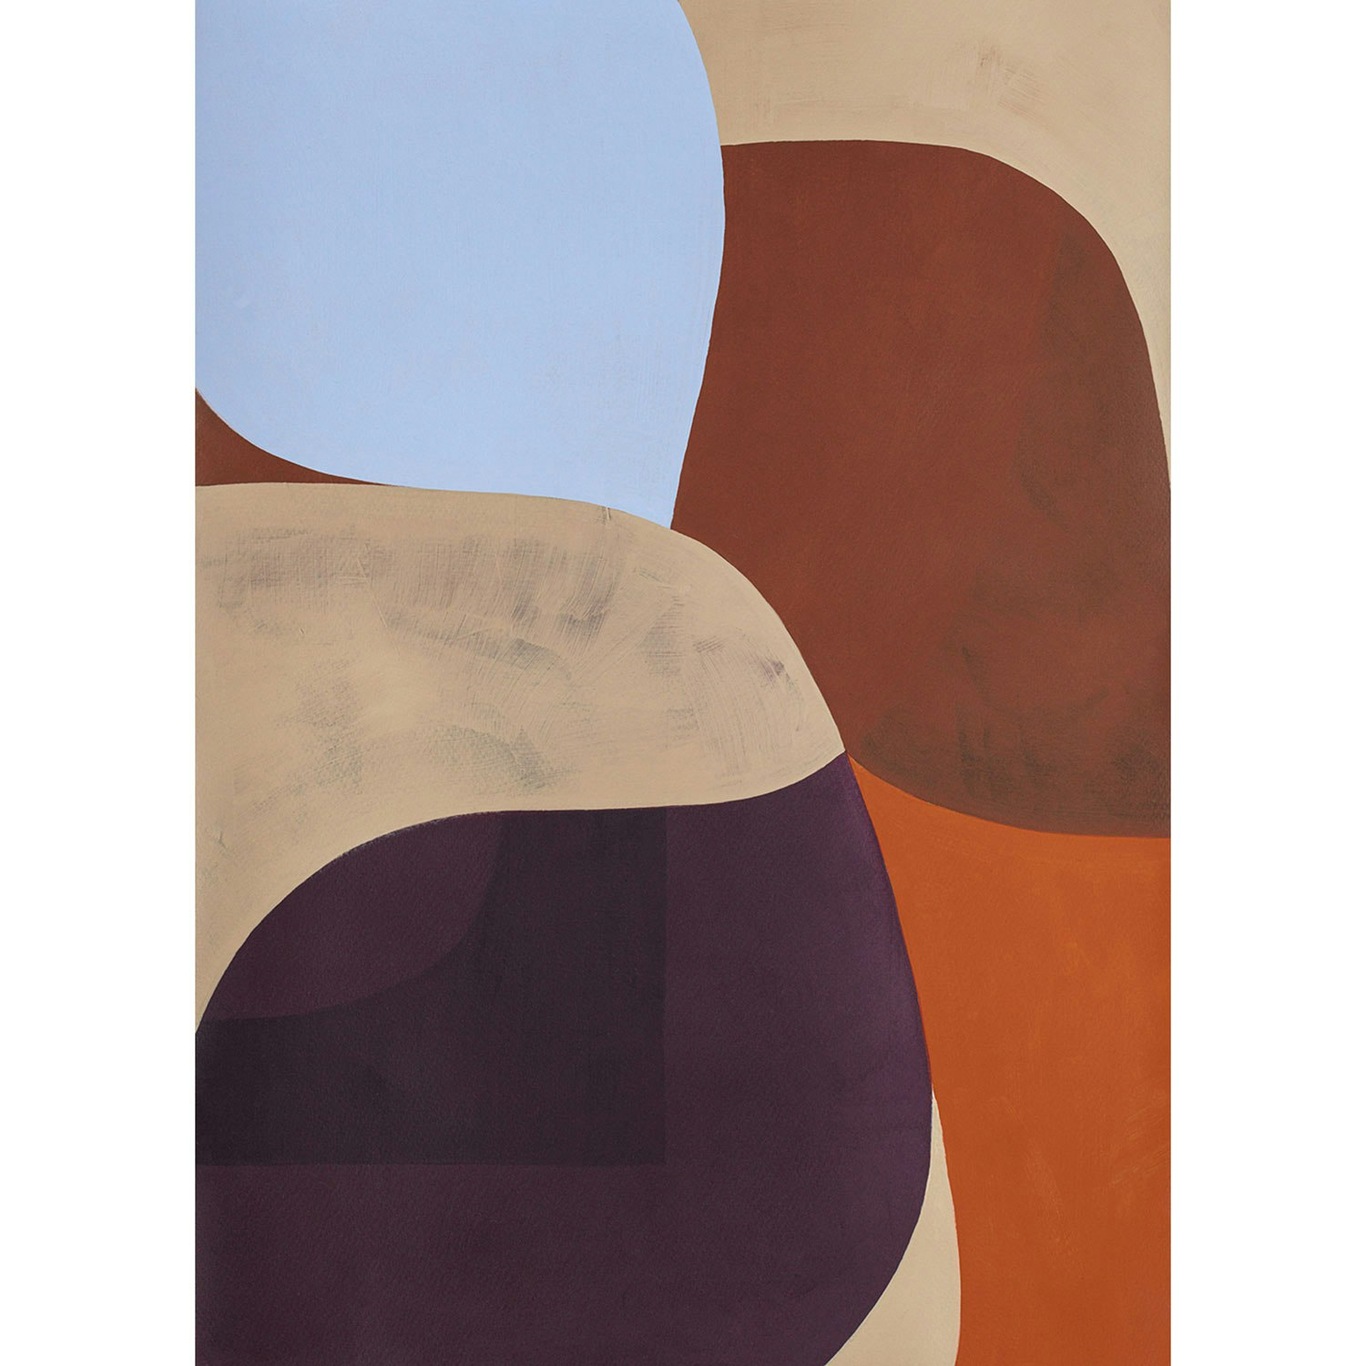 Painted Shapes 02 Poster 50x70 cm